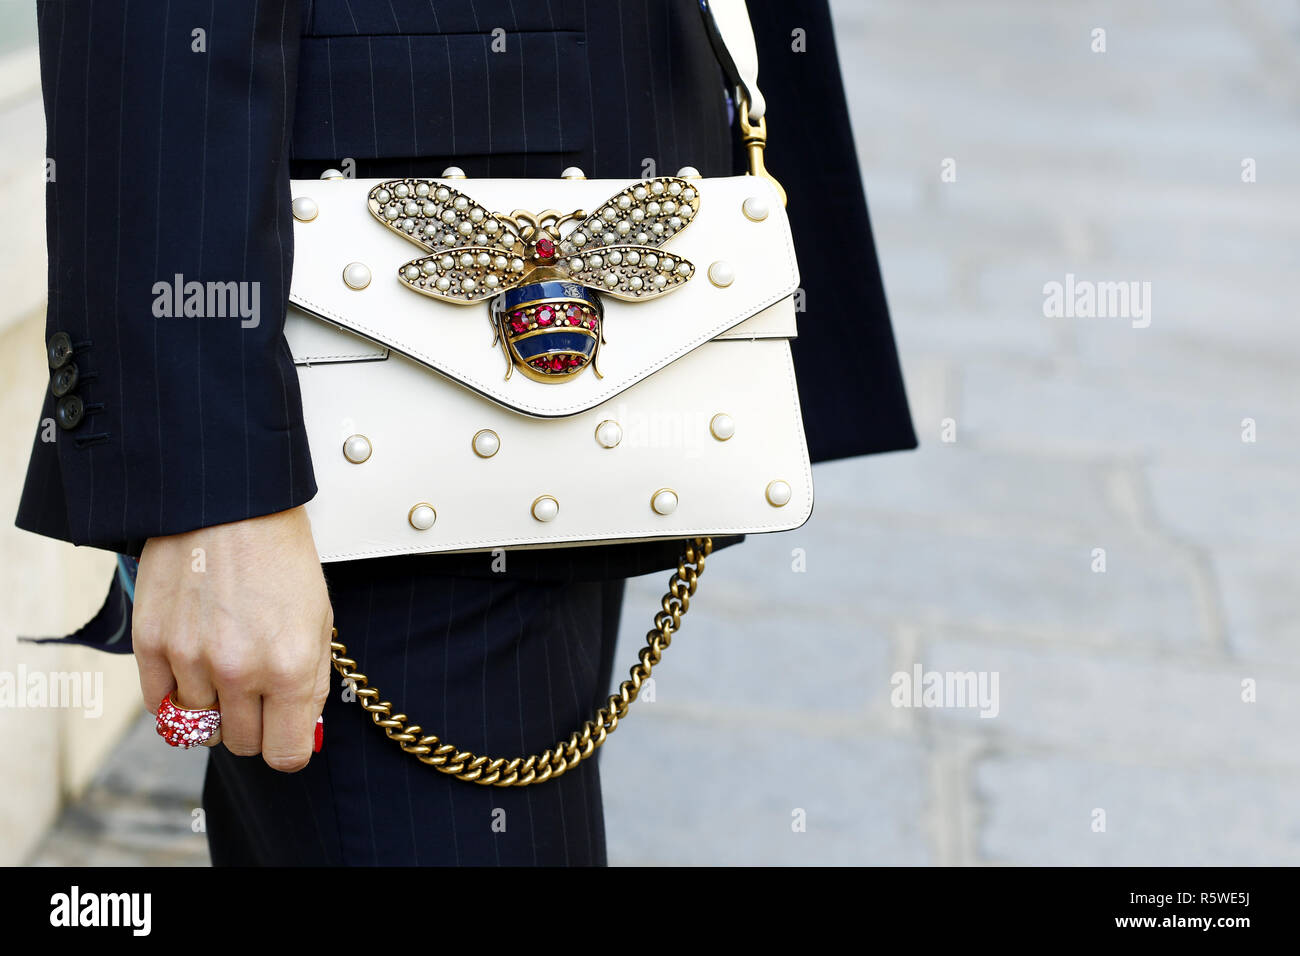 Gucci Bag High Resolution Stock Photography and Images - Alamy